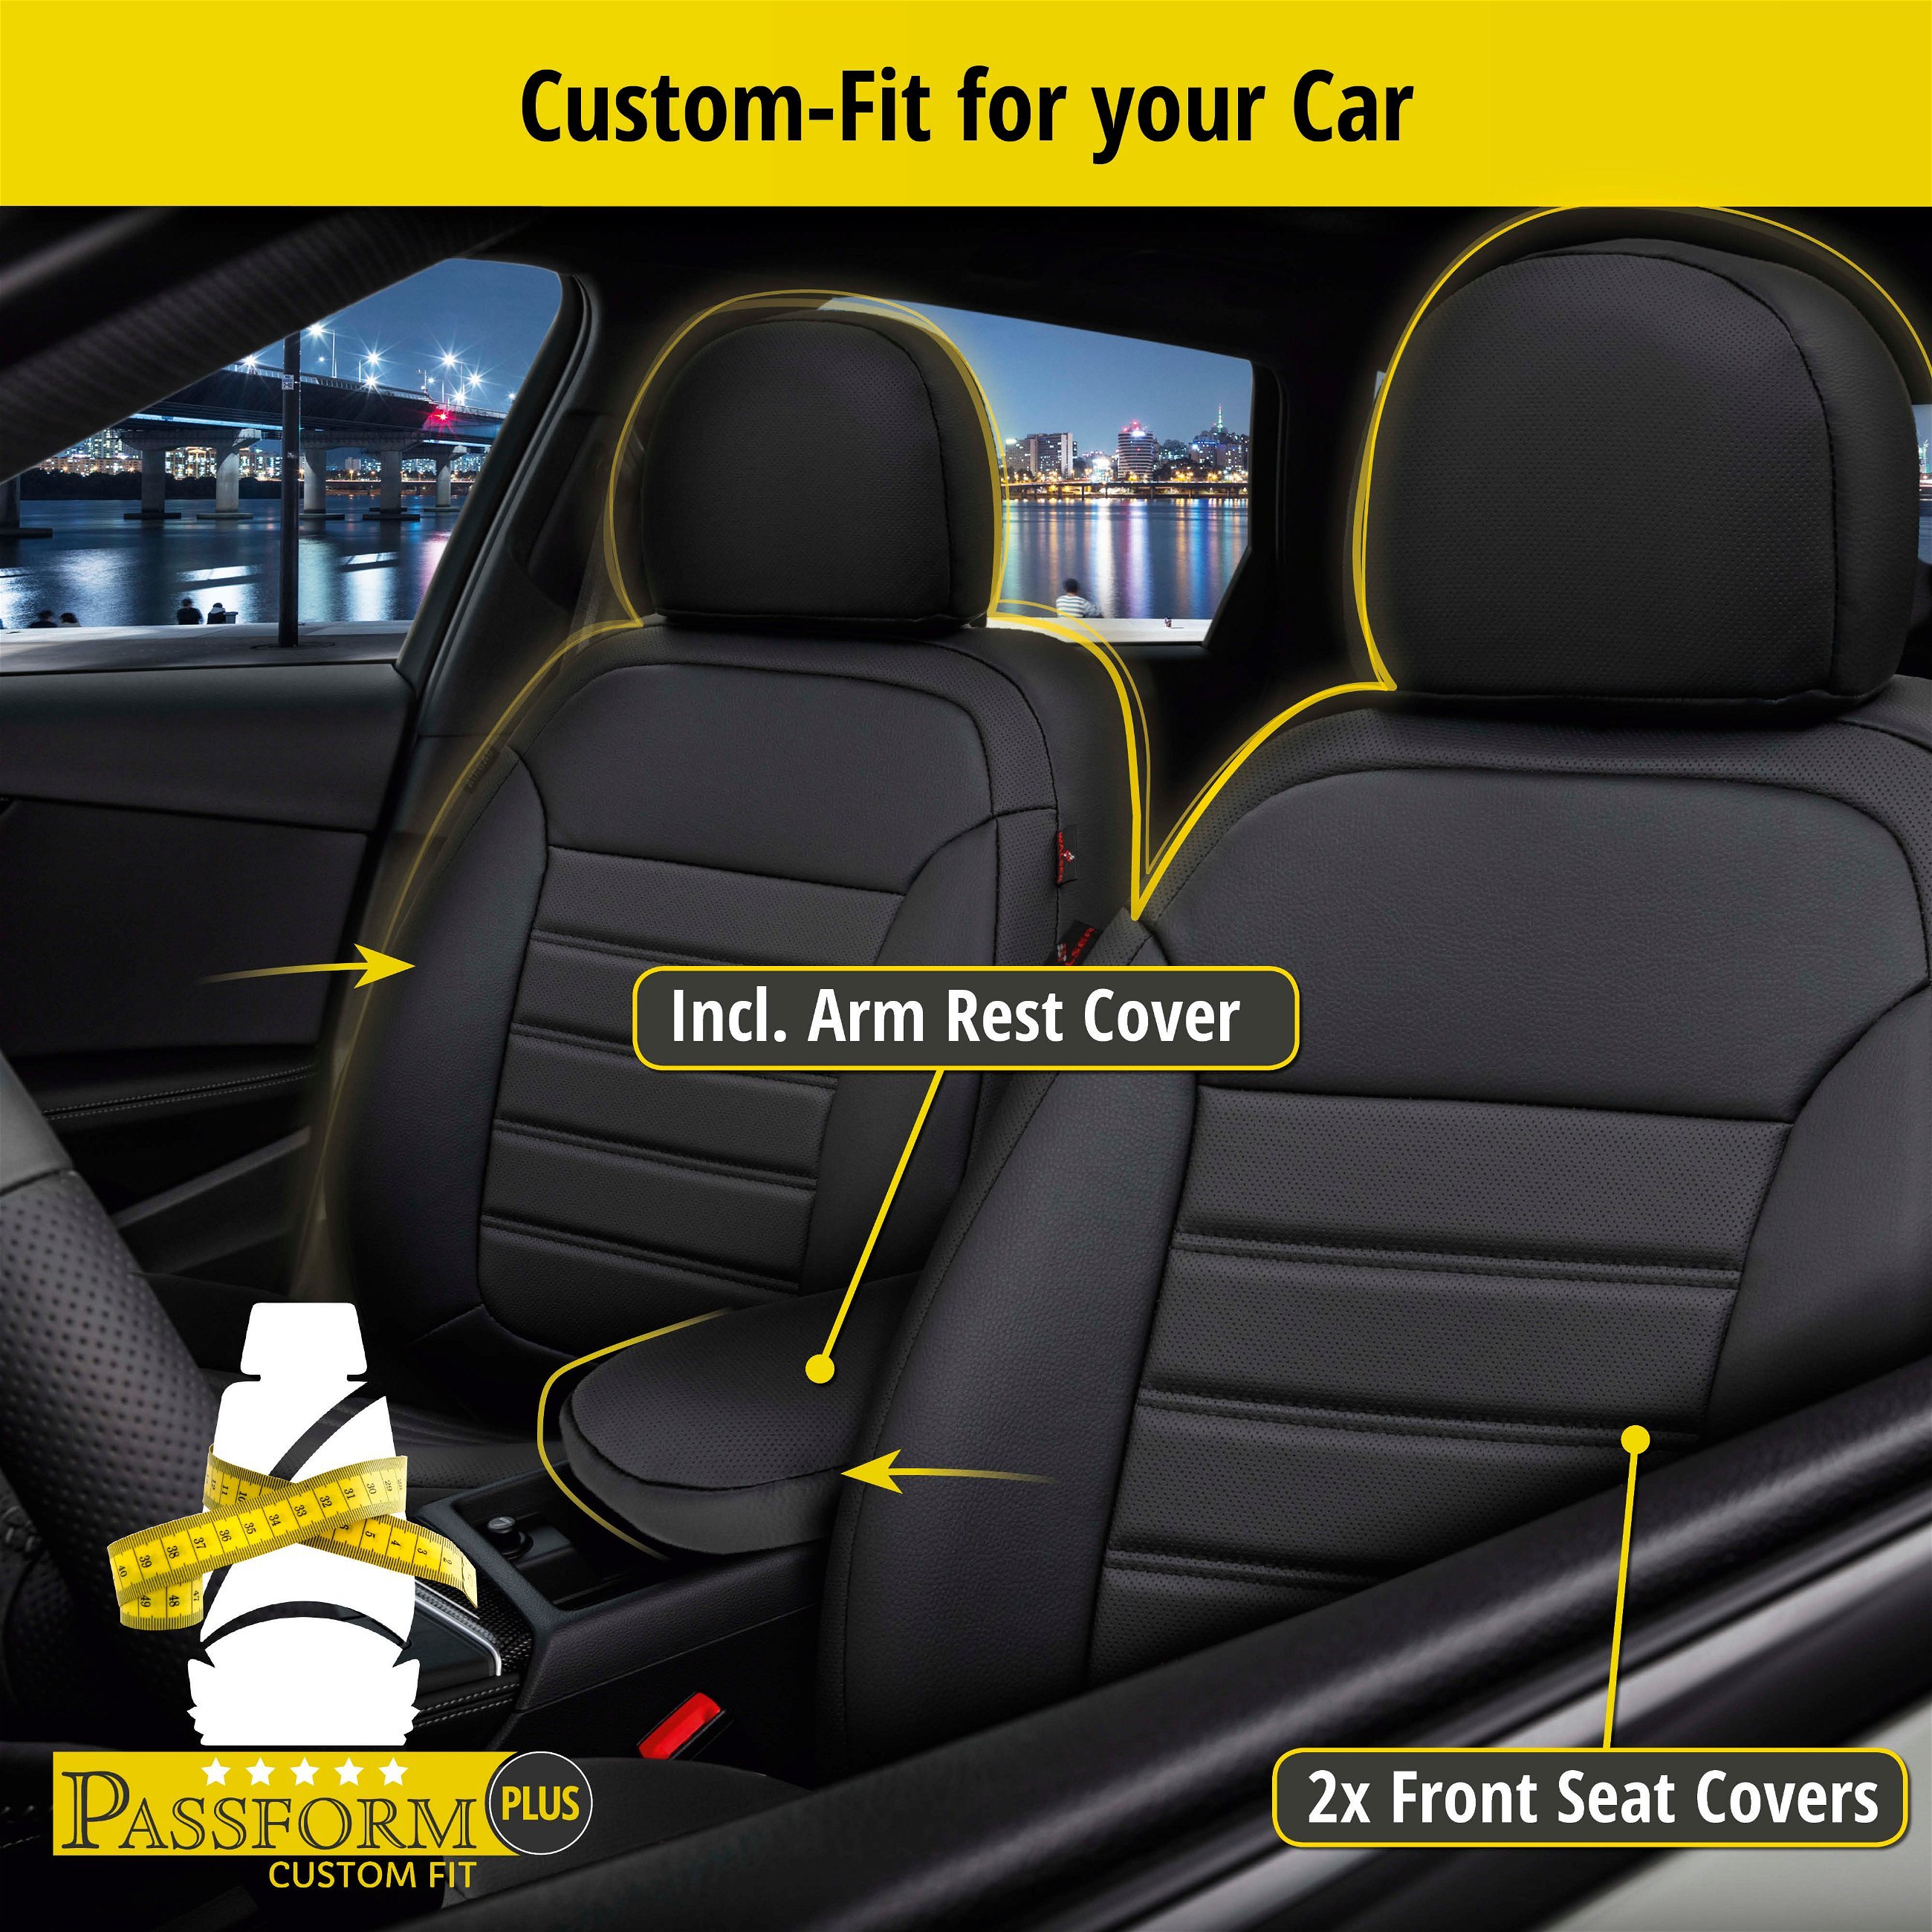 Seat Cover Robusto for VW Passat Variant (365) 08/2010-12/2015, 2 seat covers for normal seats